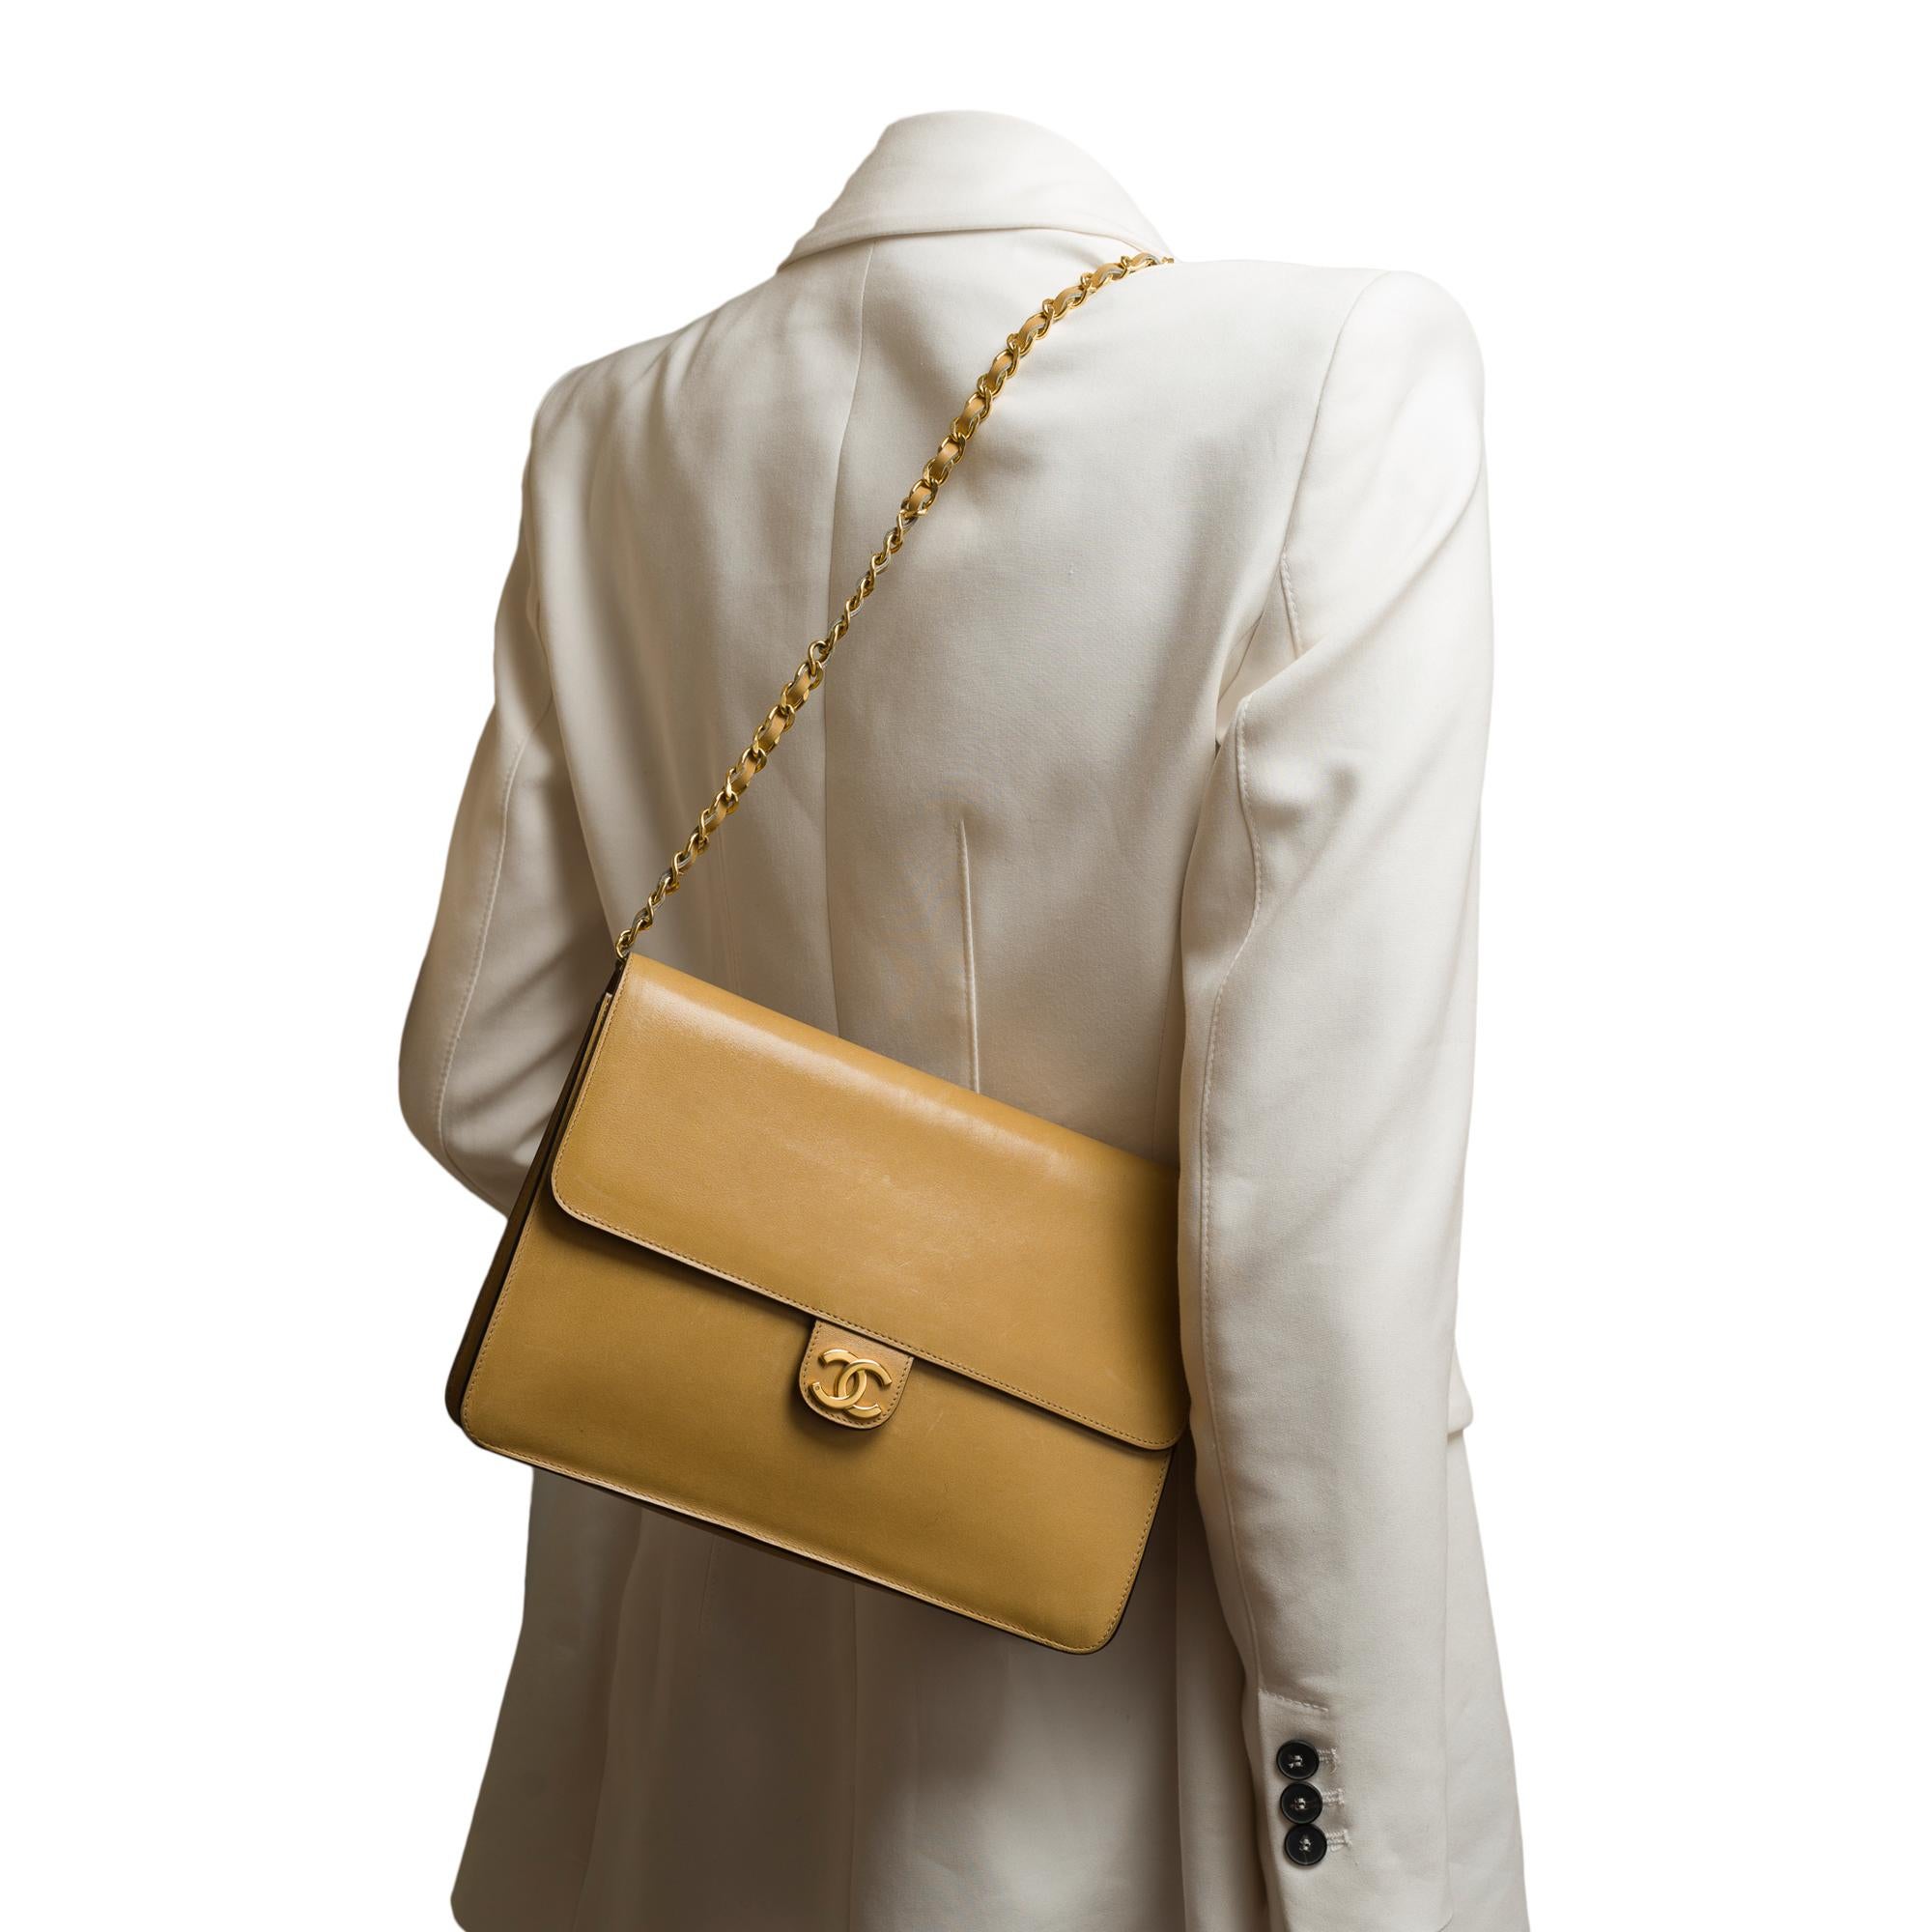 Gorgeous Chanel Classic shoulder flap bag in beige box calfskin leather, GHW For Sale 8